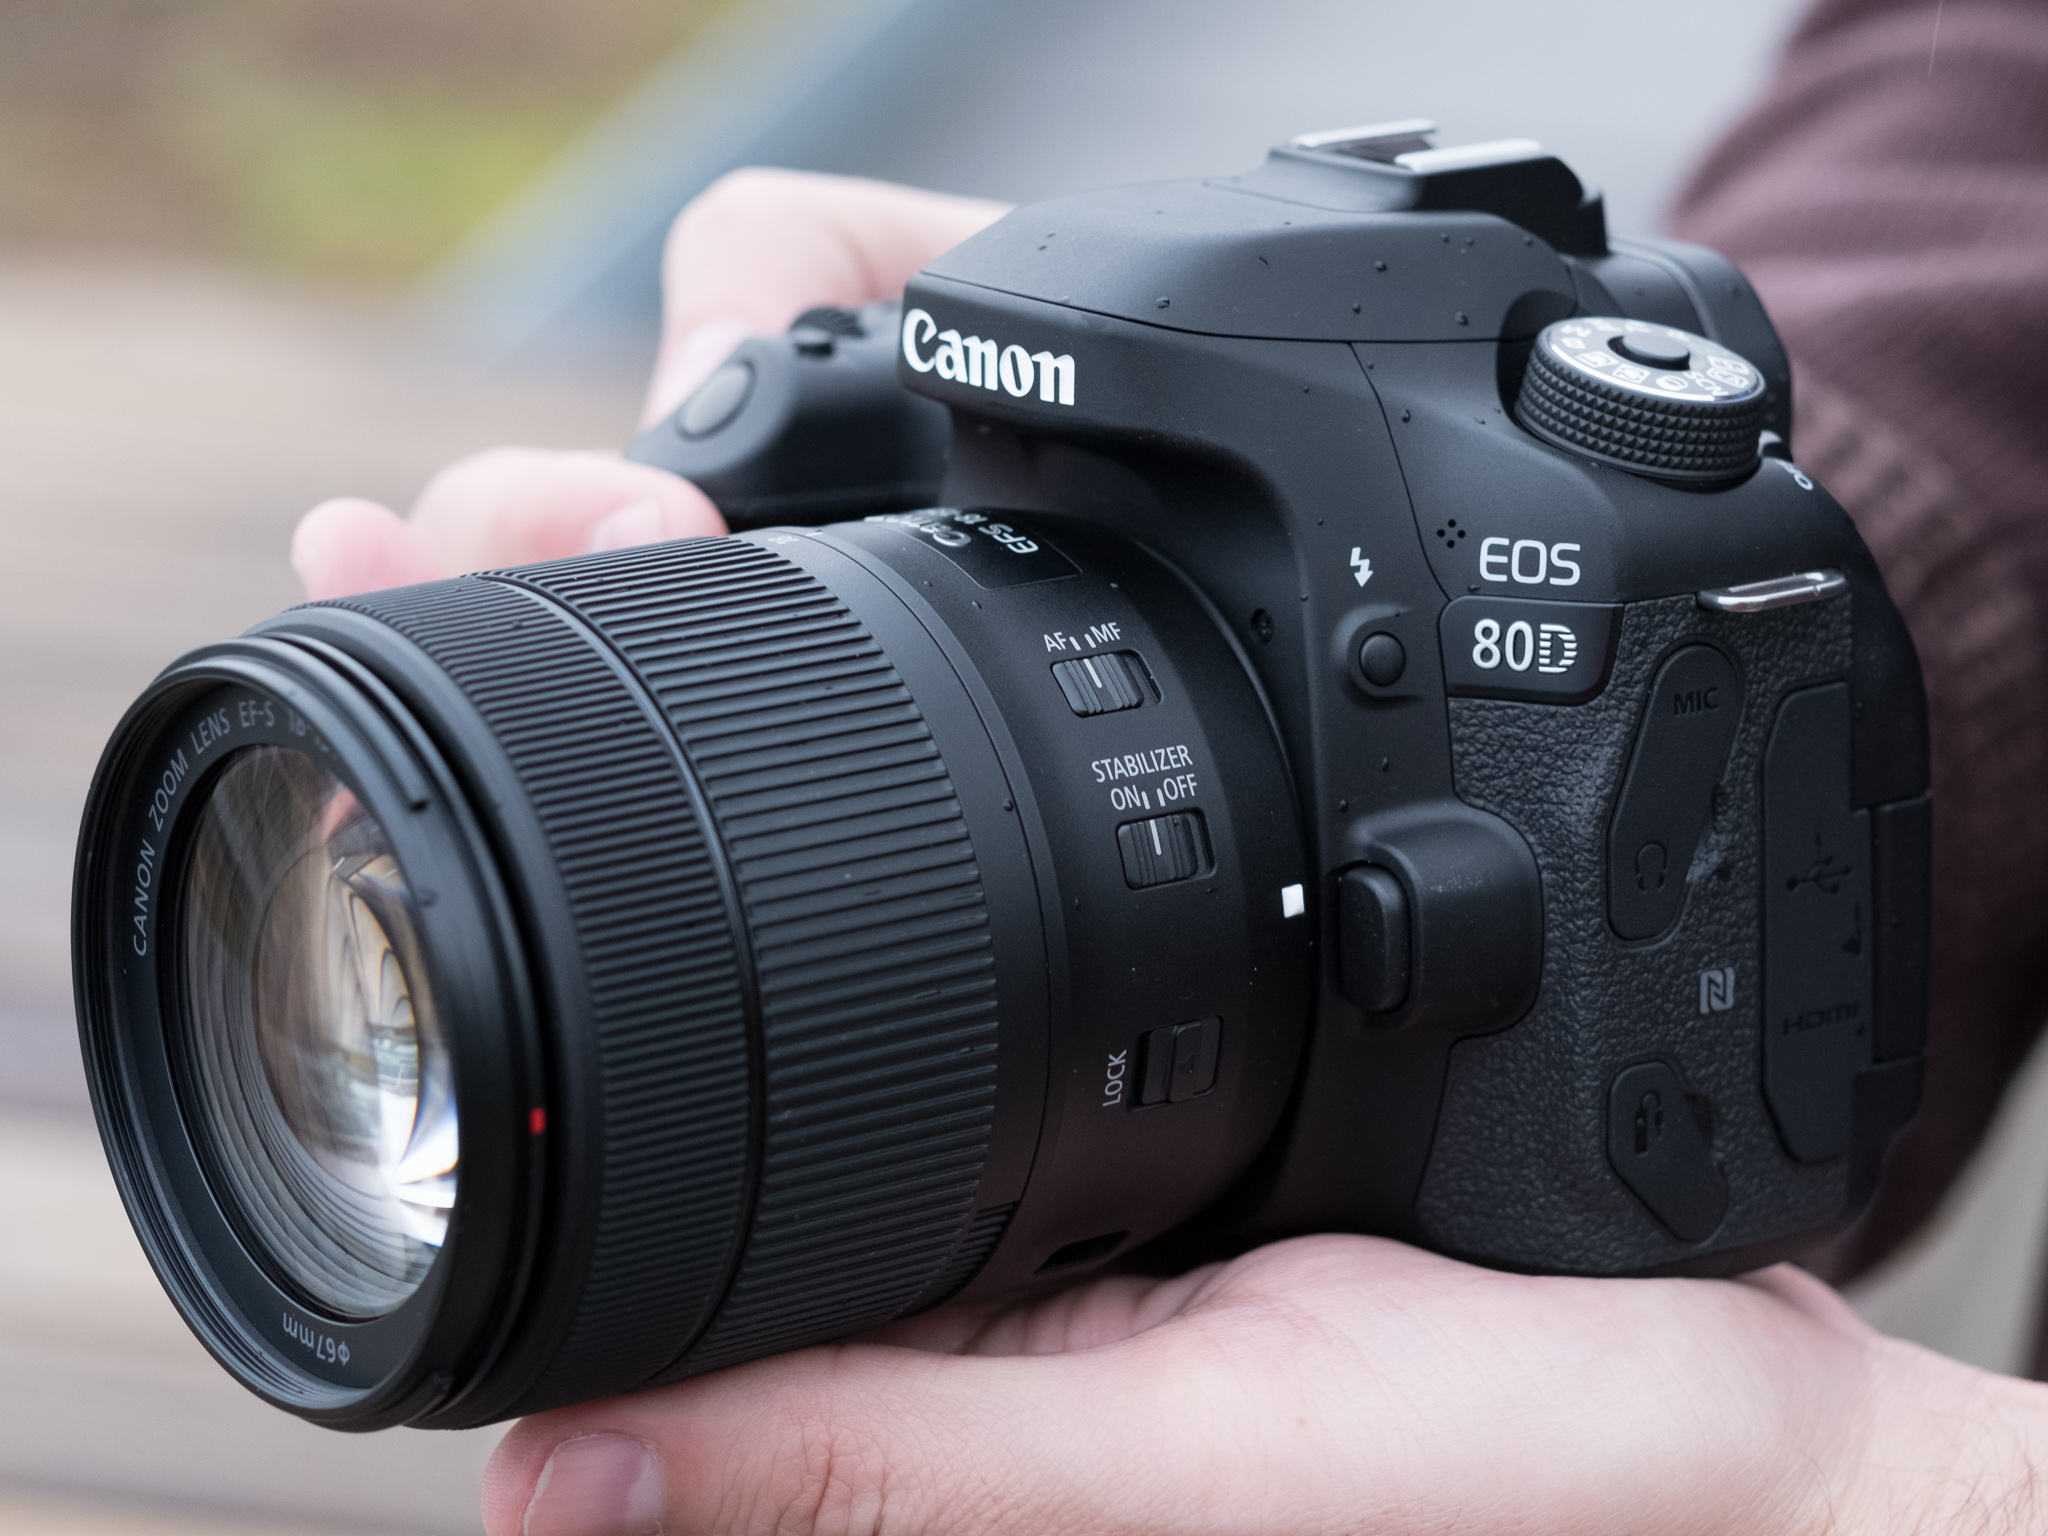 The Recommended Settings for the Canon 80D